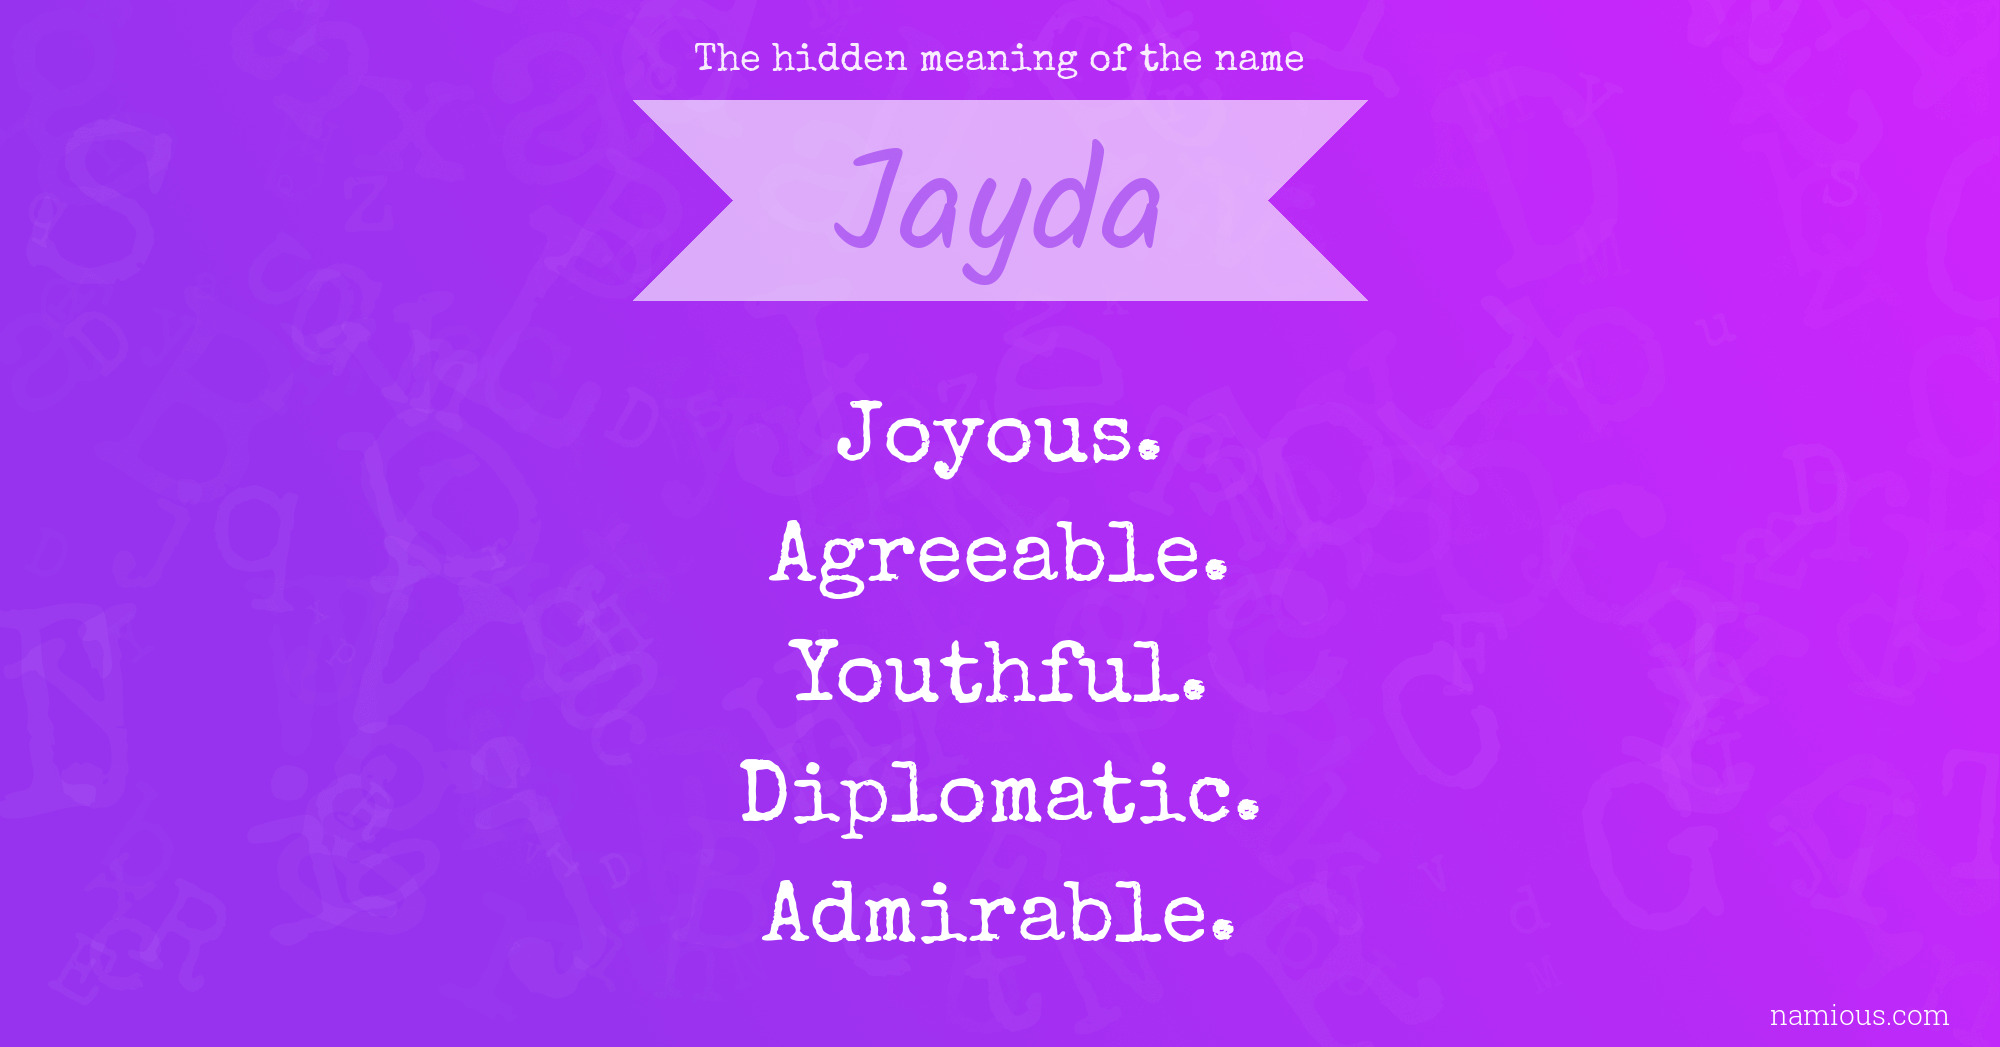 The hidden meaning of the name Jayda